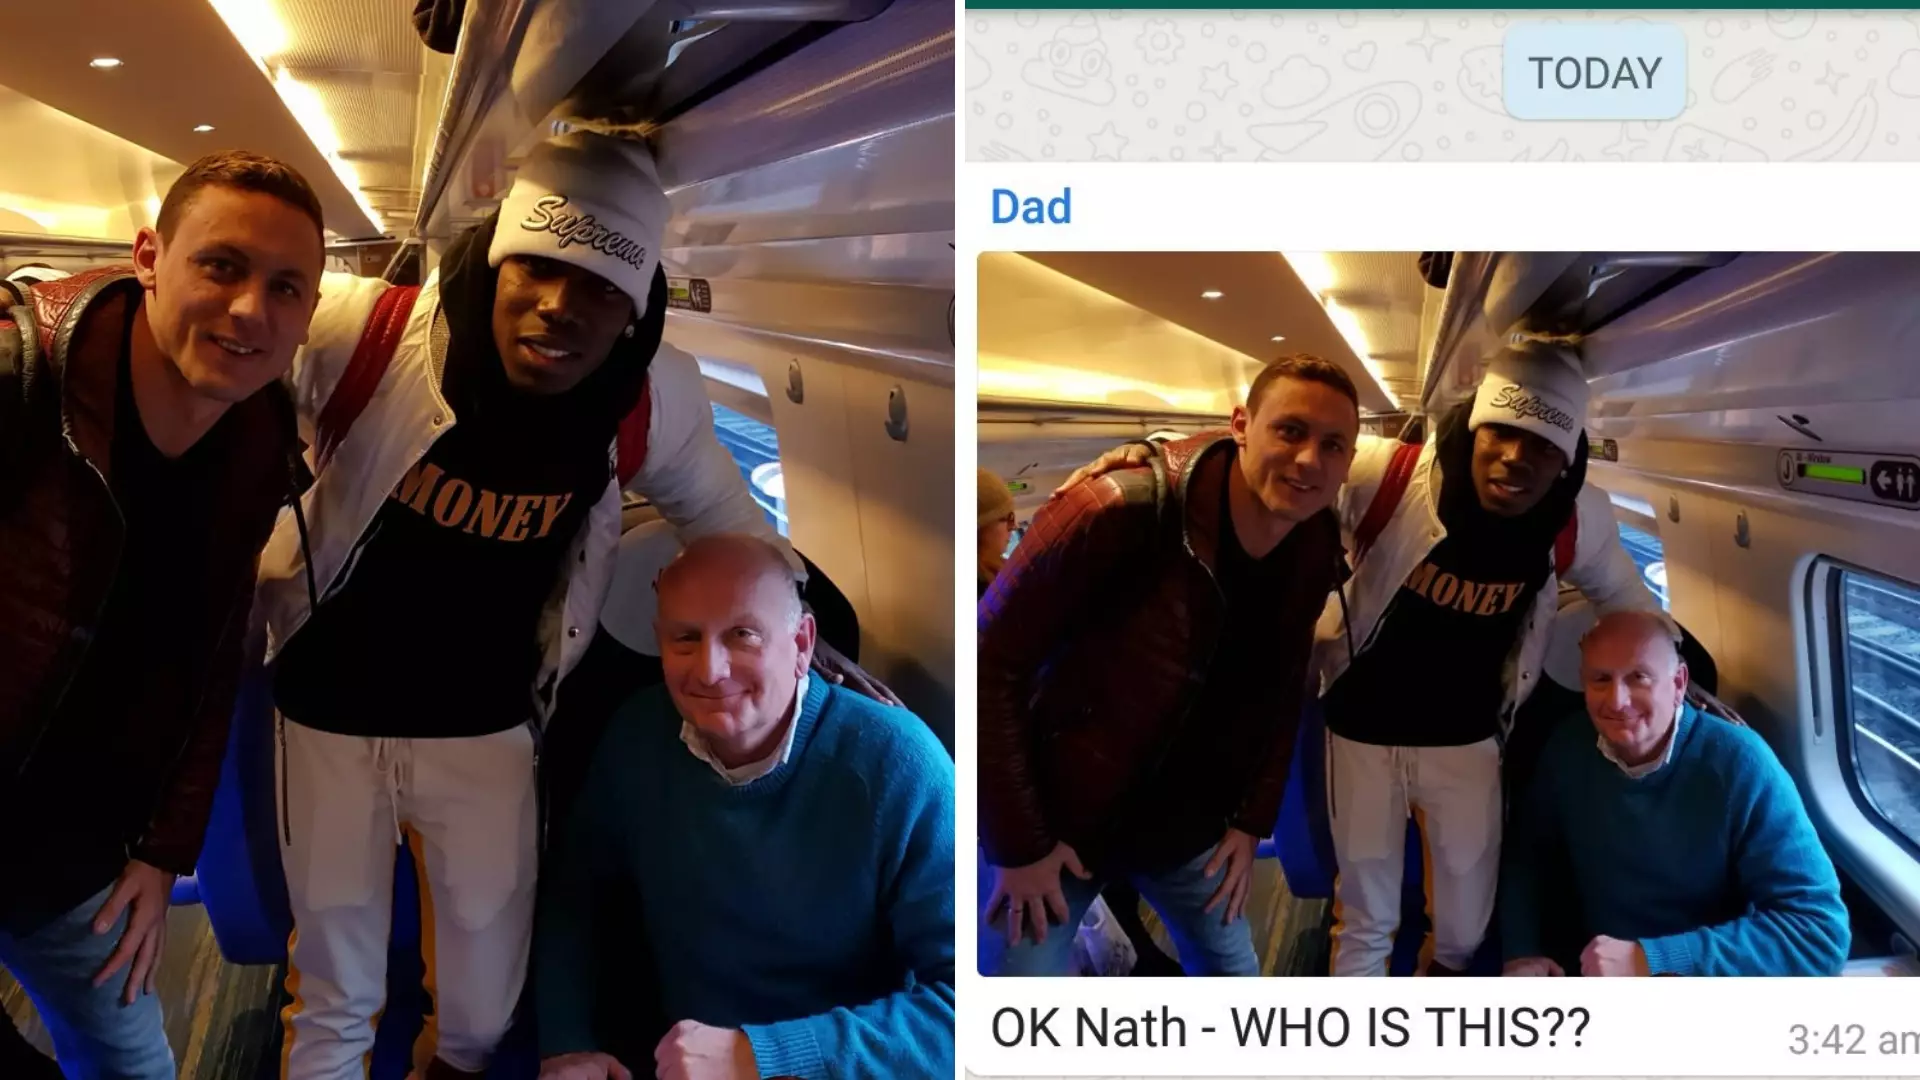 Fan’s Story Of His Parents Randomly Meeting Paul Pogba On A Train Goes Viral